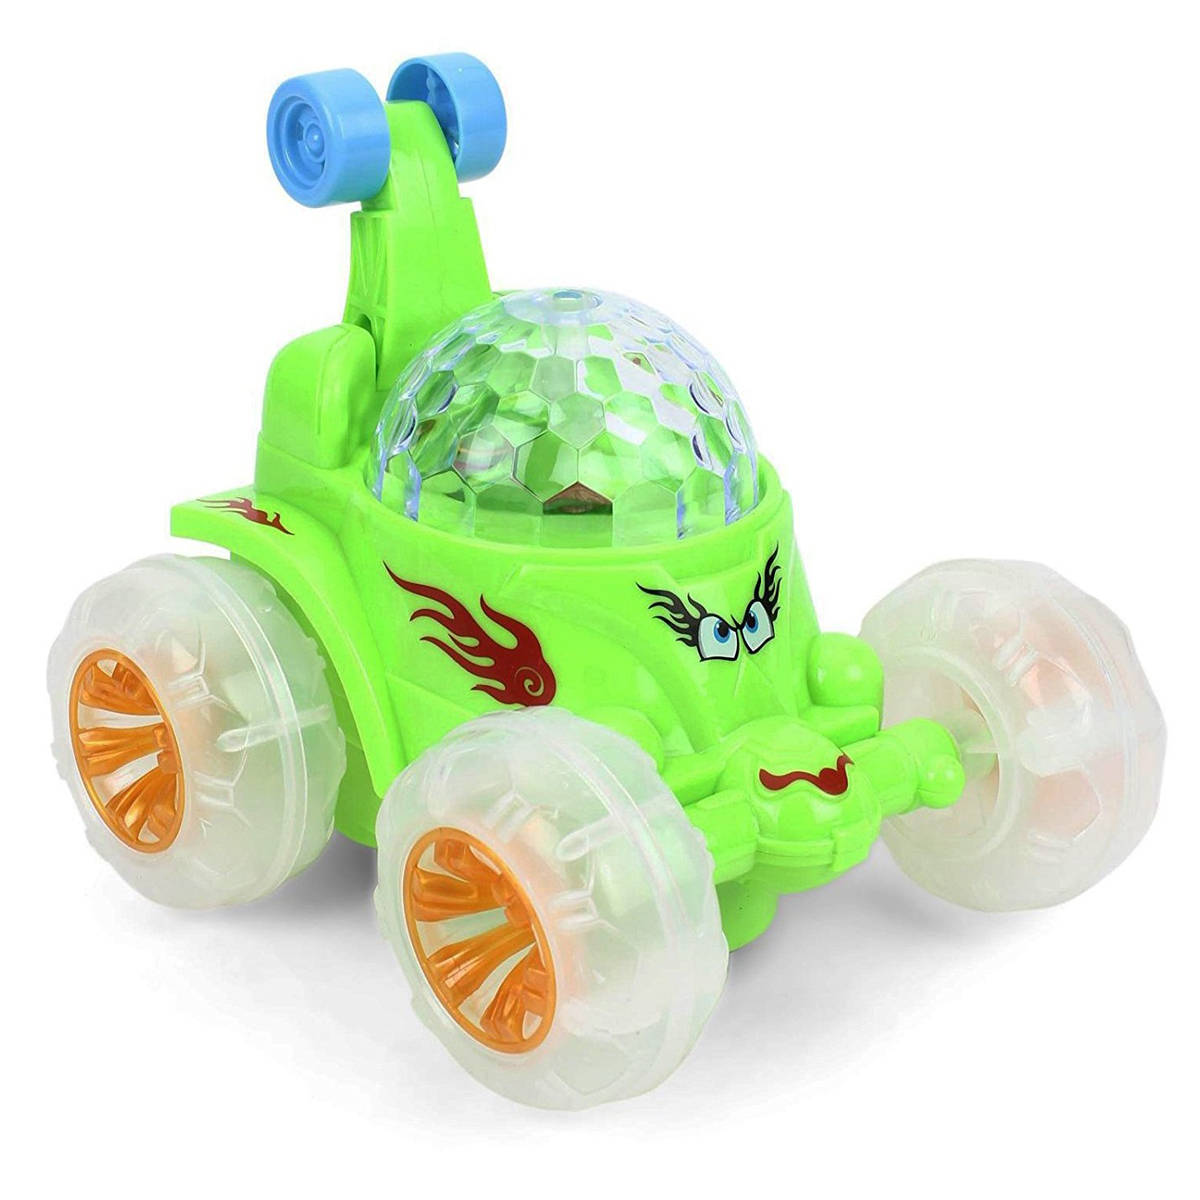 Smiles Creation 360 Degree Rotating Dancing Car with Music Toy for Kids - Green